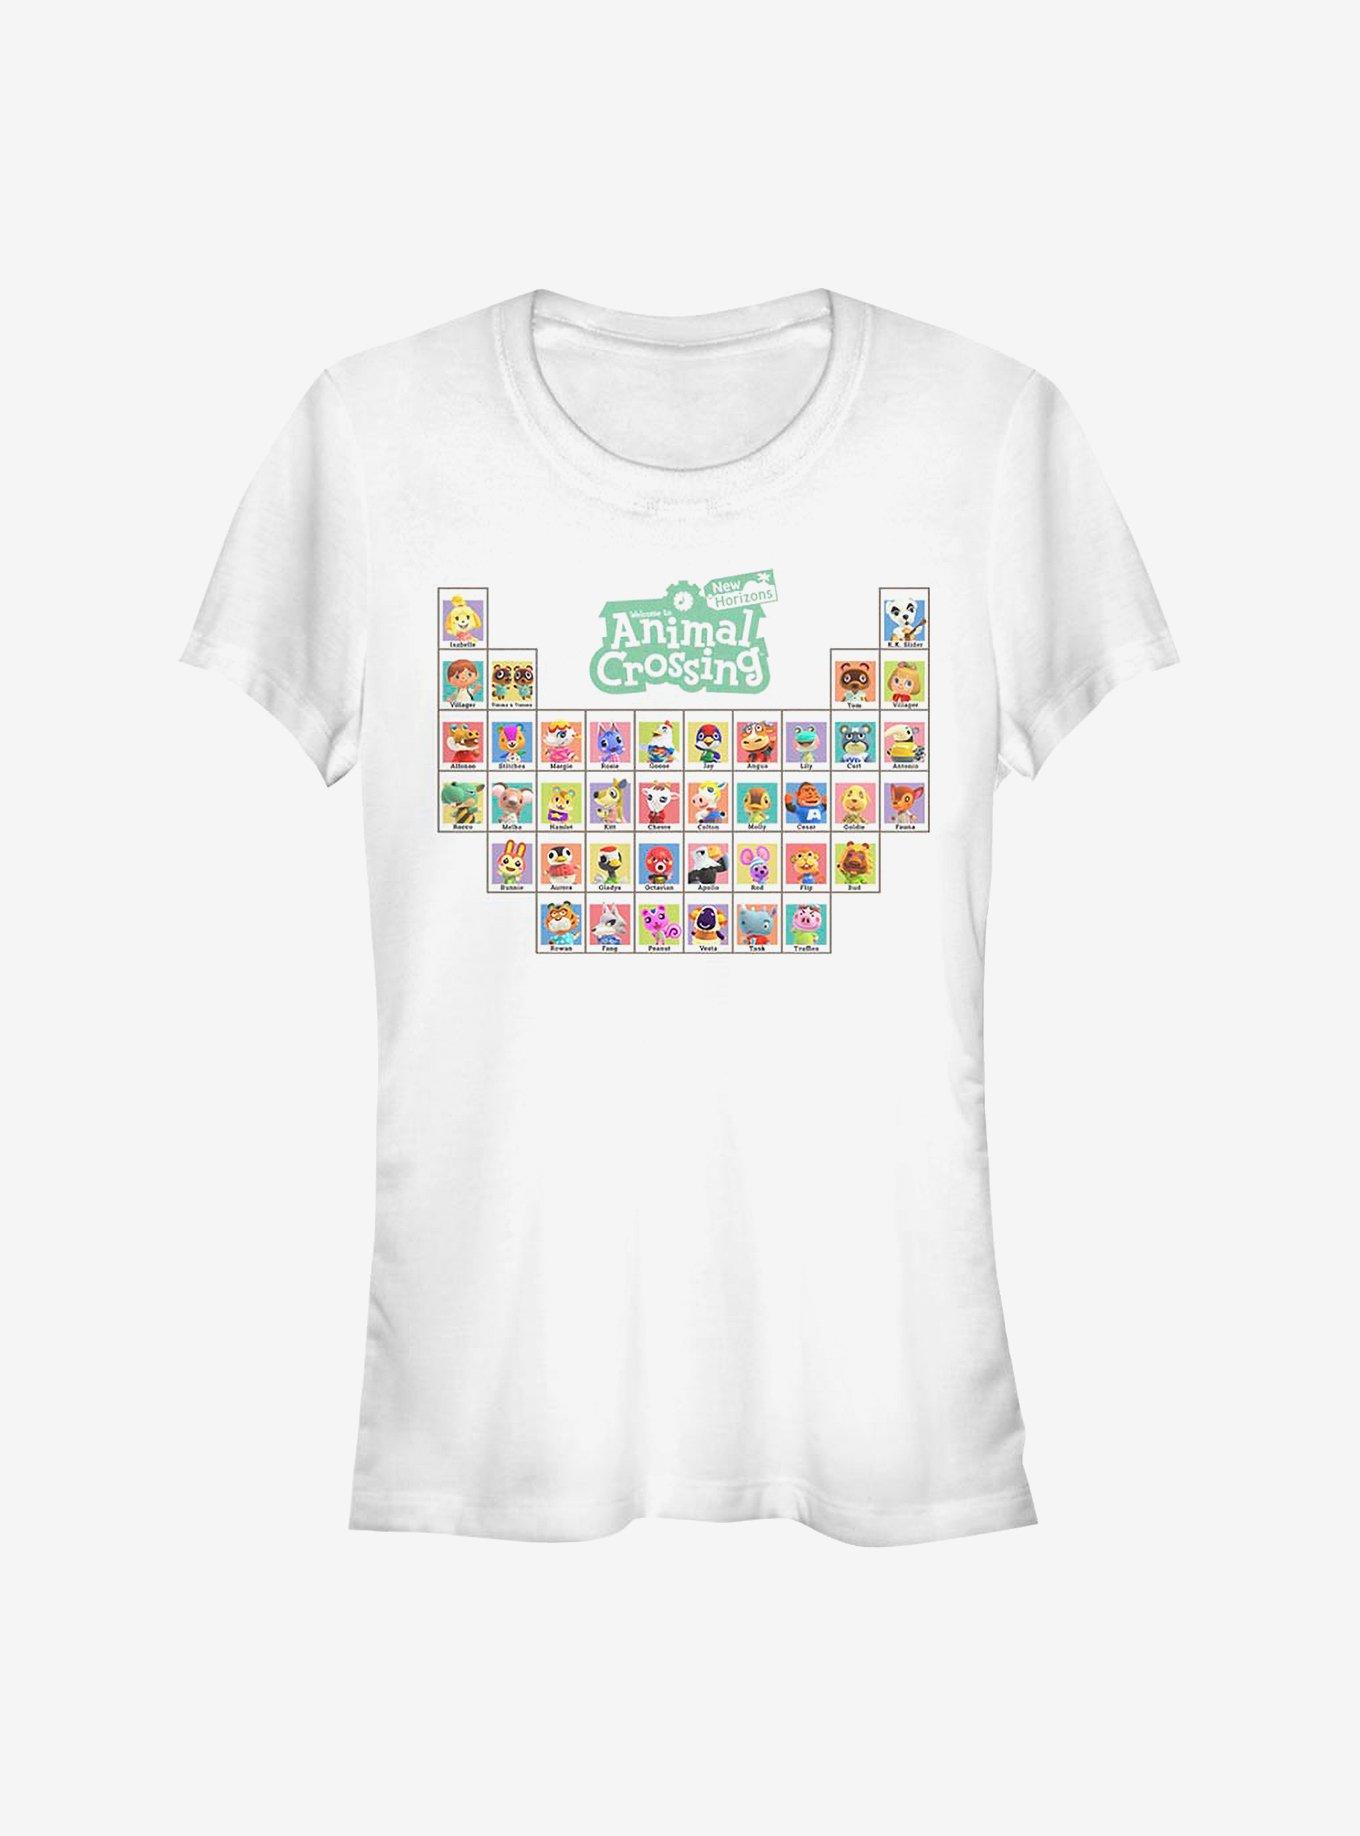 Animal Crossing: New Horizons Table Of Villagers Girls T-Shirt, WHITE, hi-res